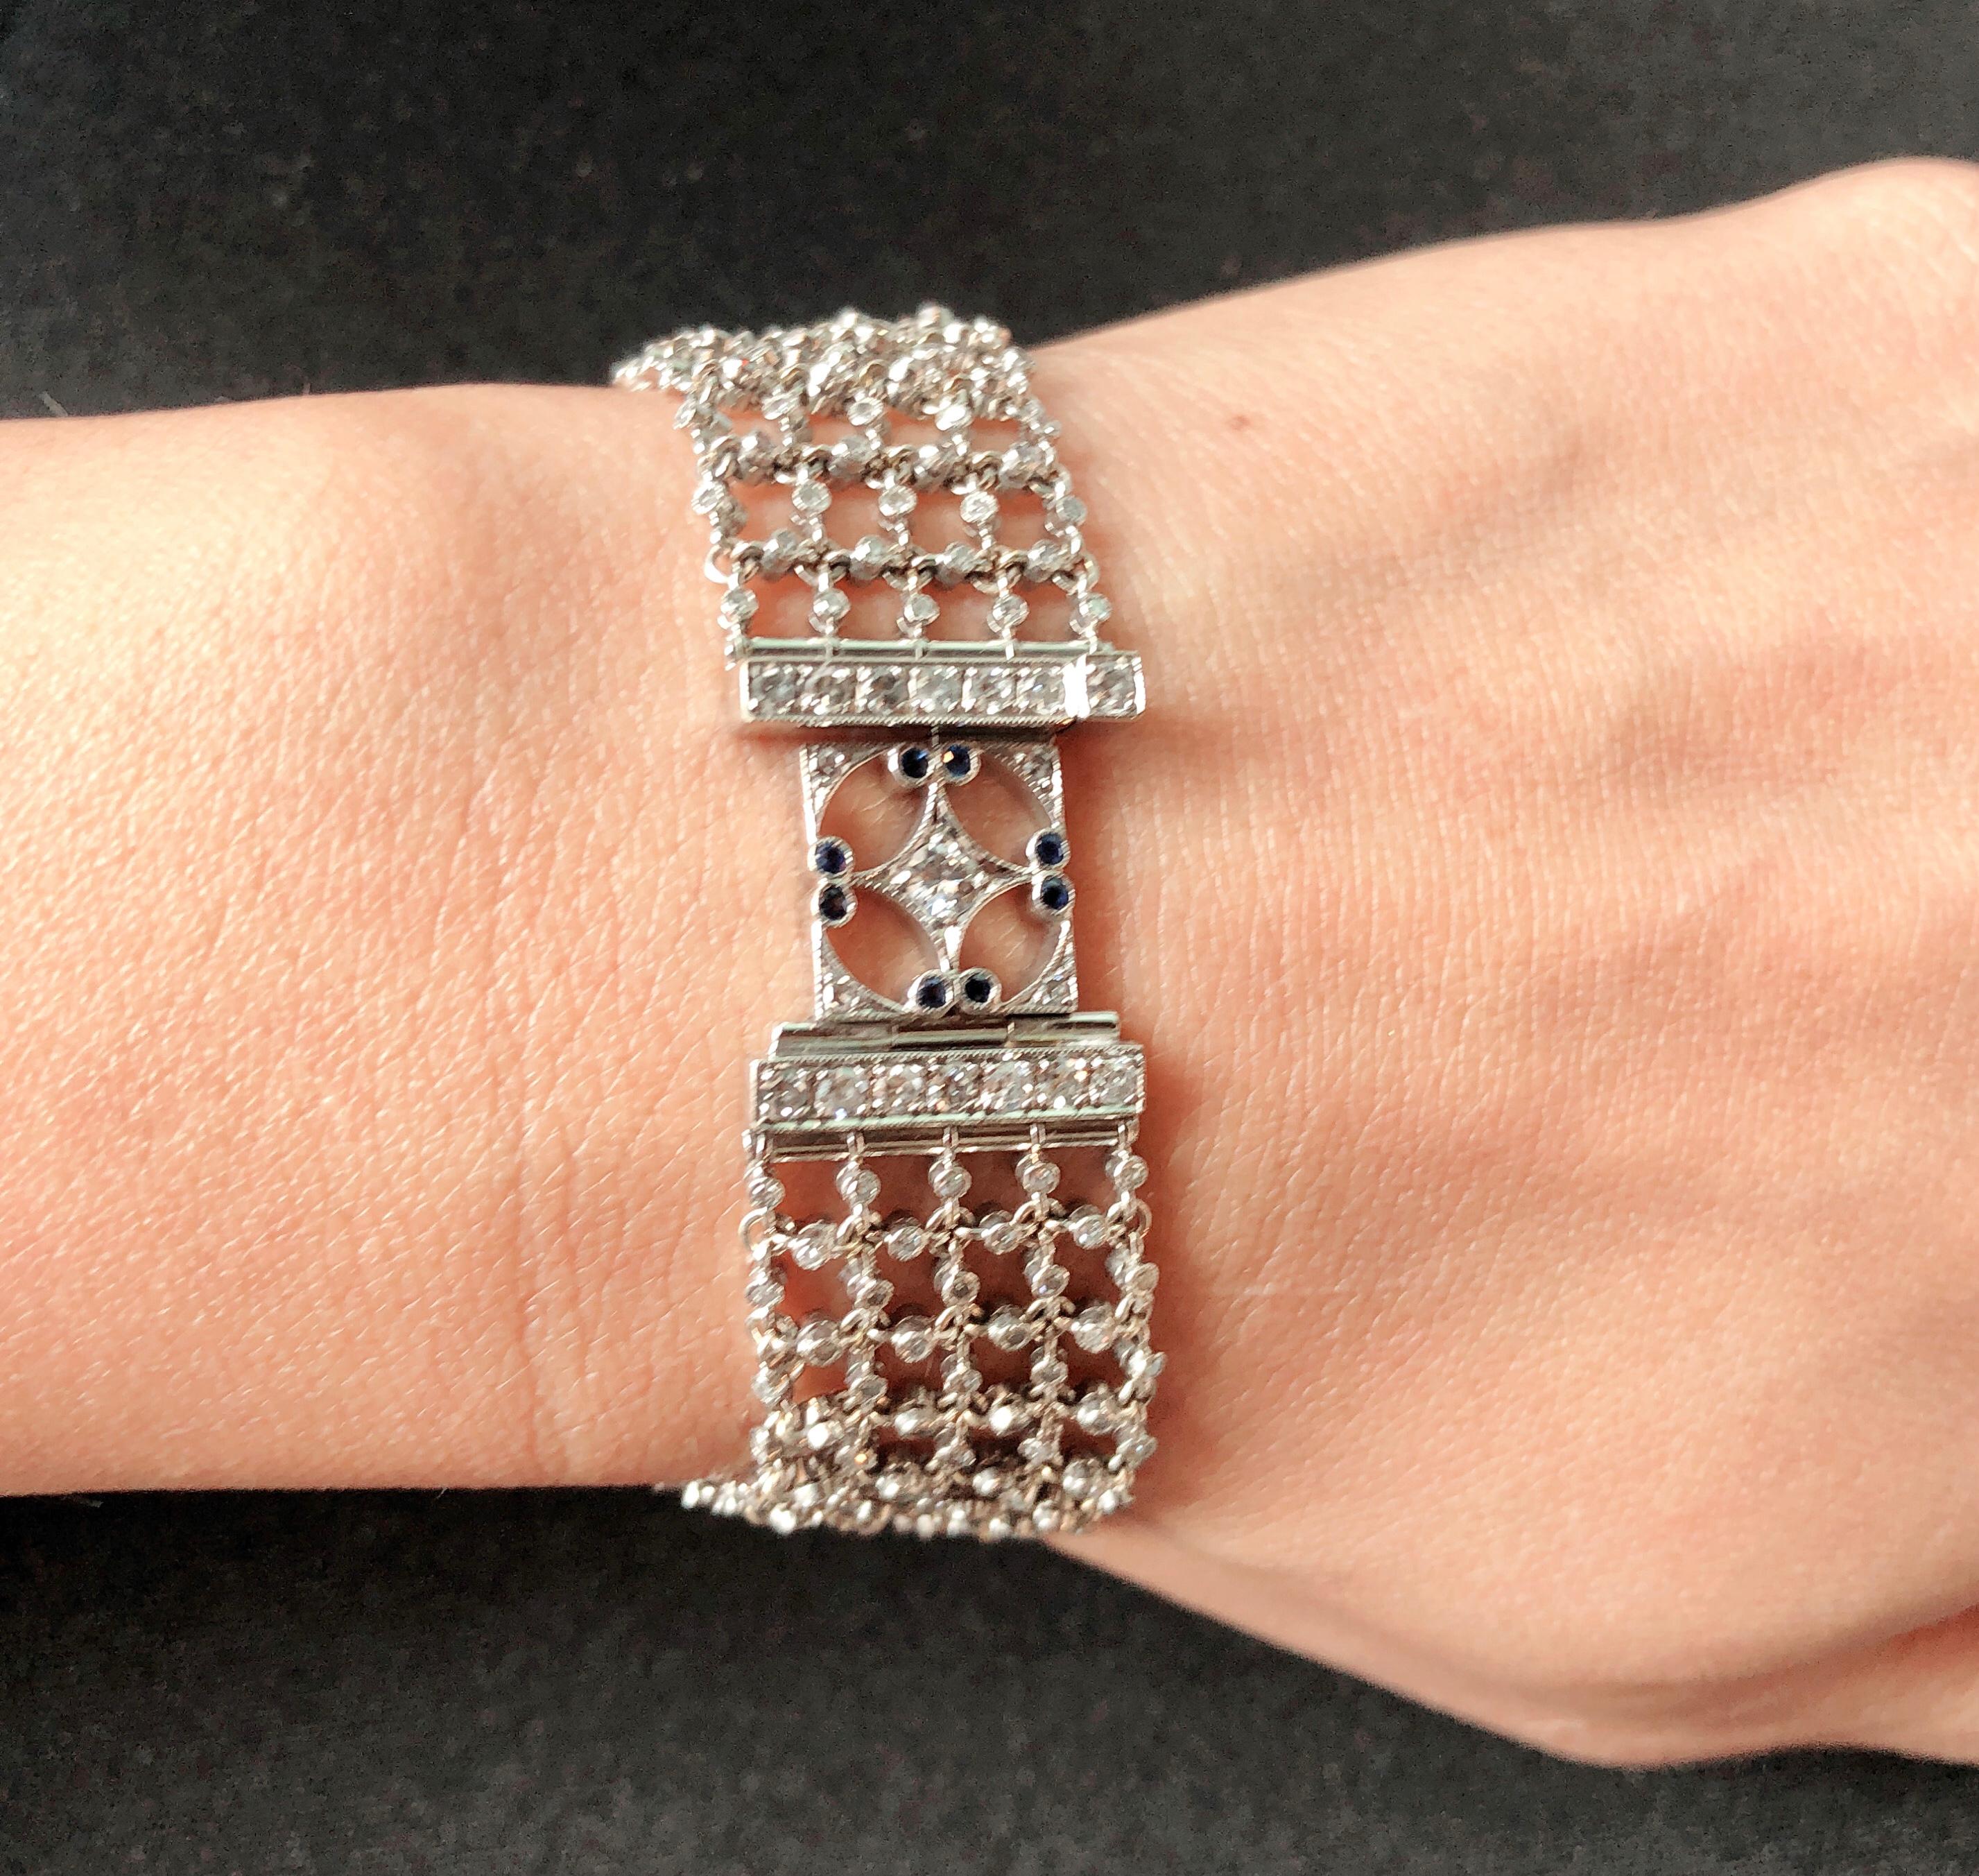 18 Karat White Gold Spectacular Sapphire and Diamond Lace Bracelet. The Center mesh set with 72, .01 sapphire stones interlocking with 19, .07 fine round diamonds flanked by 14 .01 ct diamonds. The center mesh having one side mesh on each end